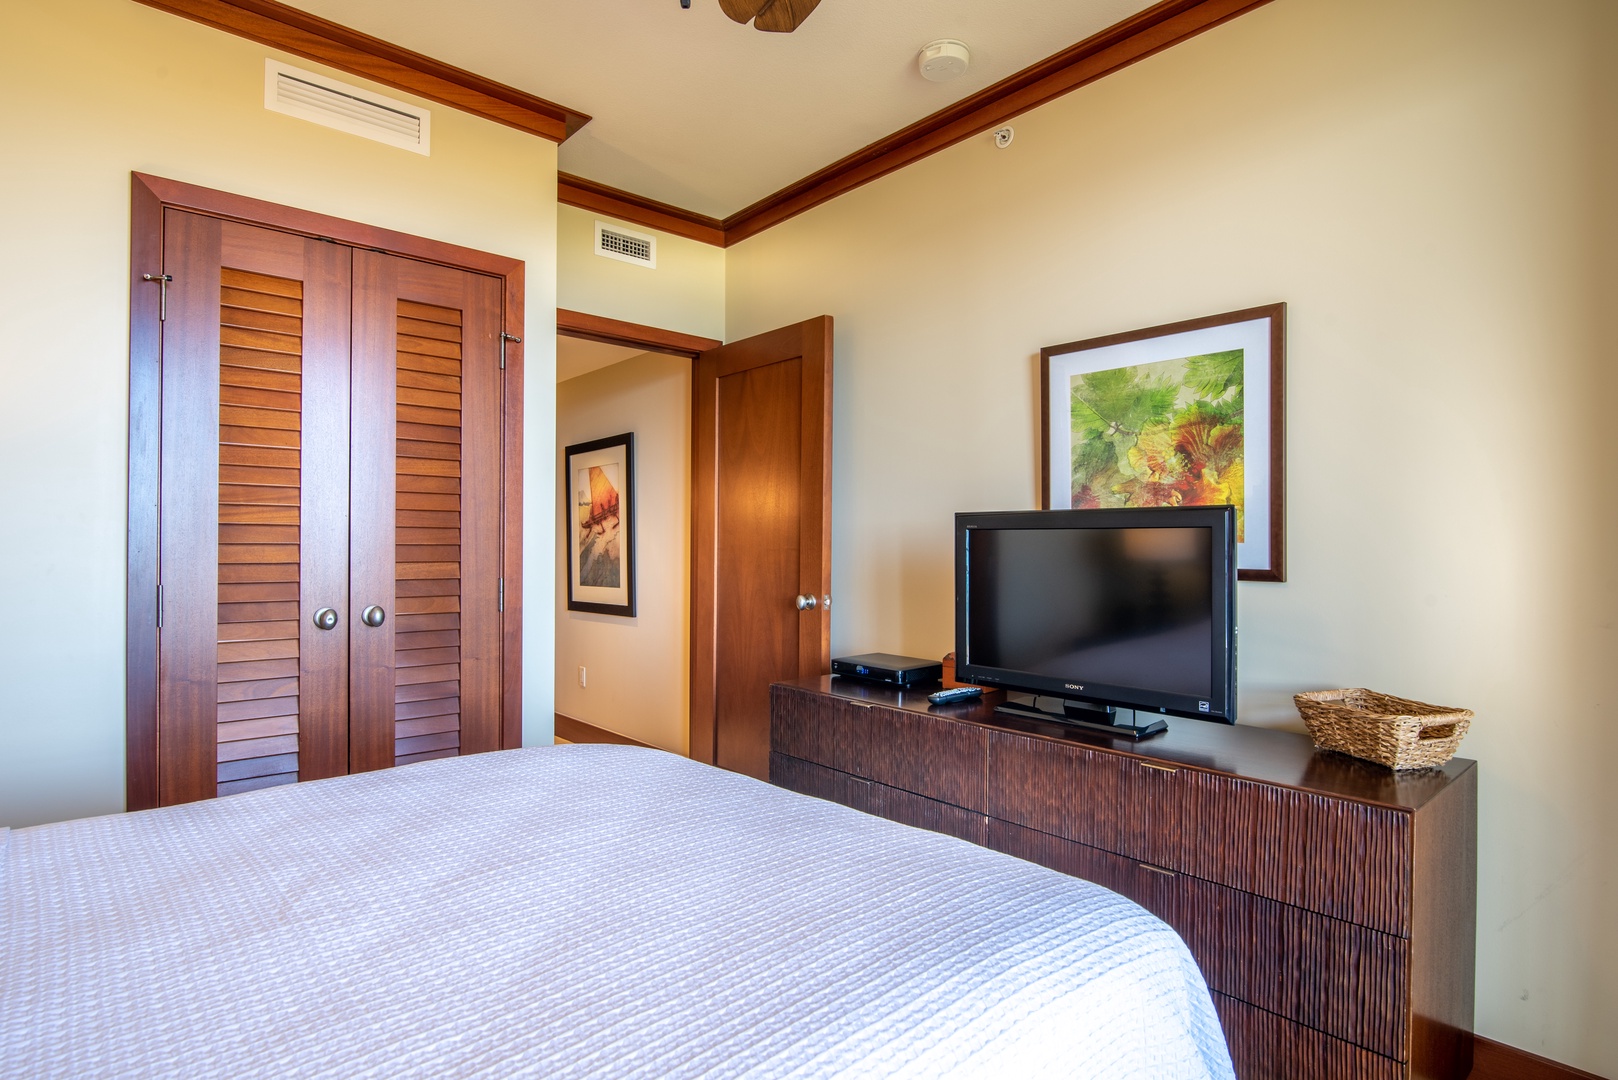 Kapolei Vacation Rentals, Ko Olina Beach Villas B901 - The second guest bedroom has a TV and ceiling fan.